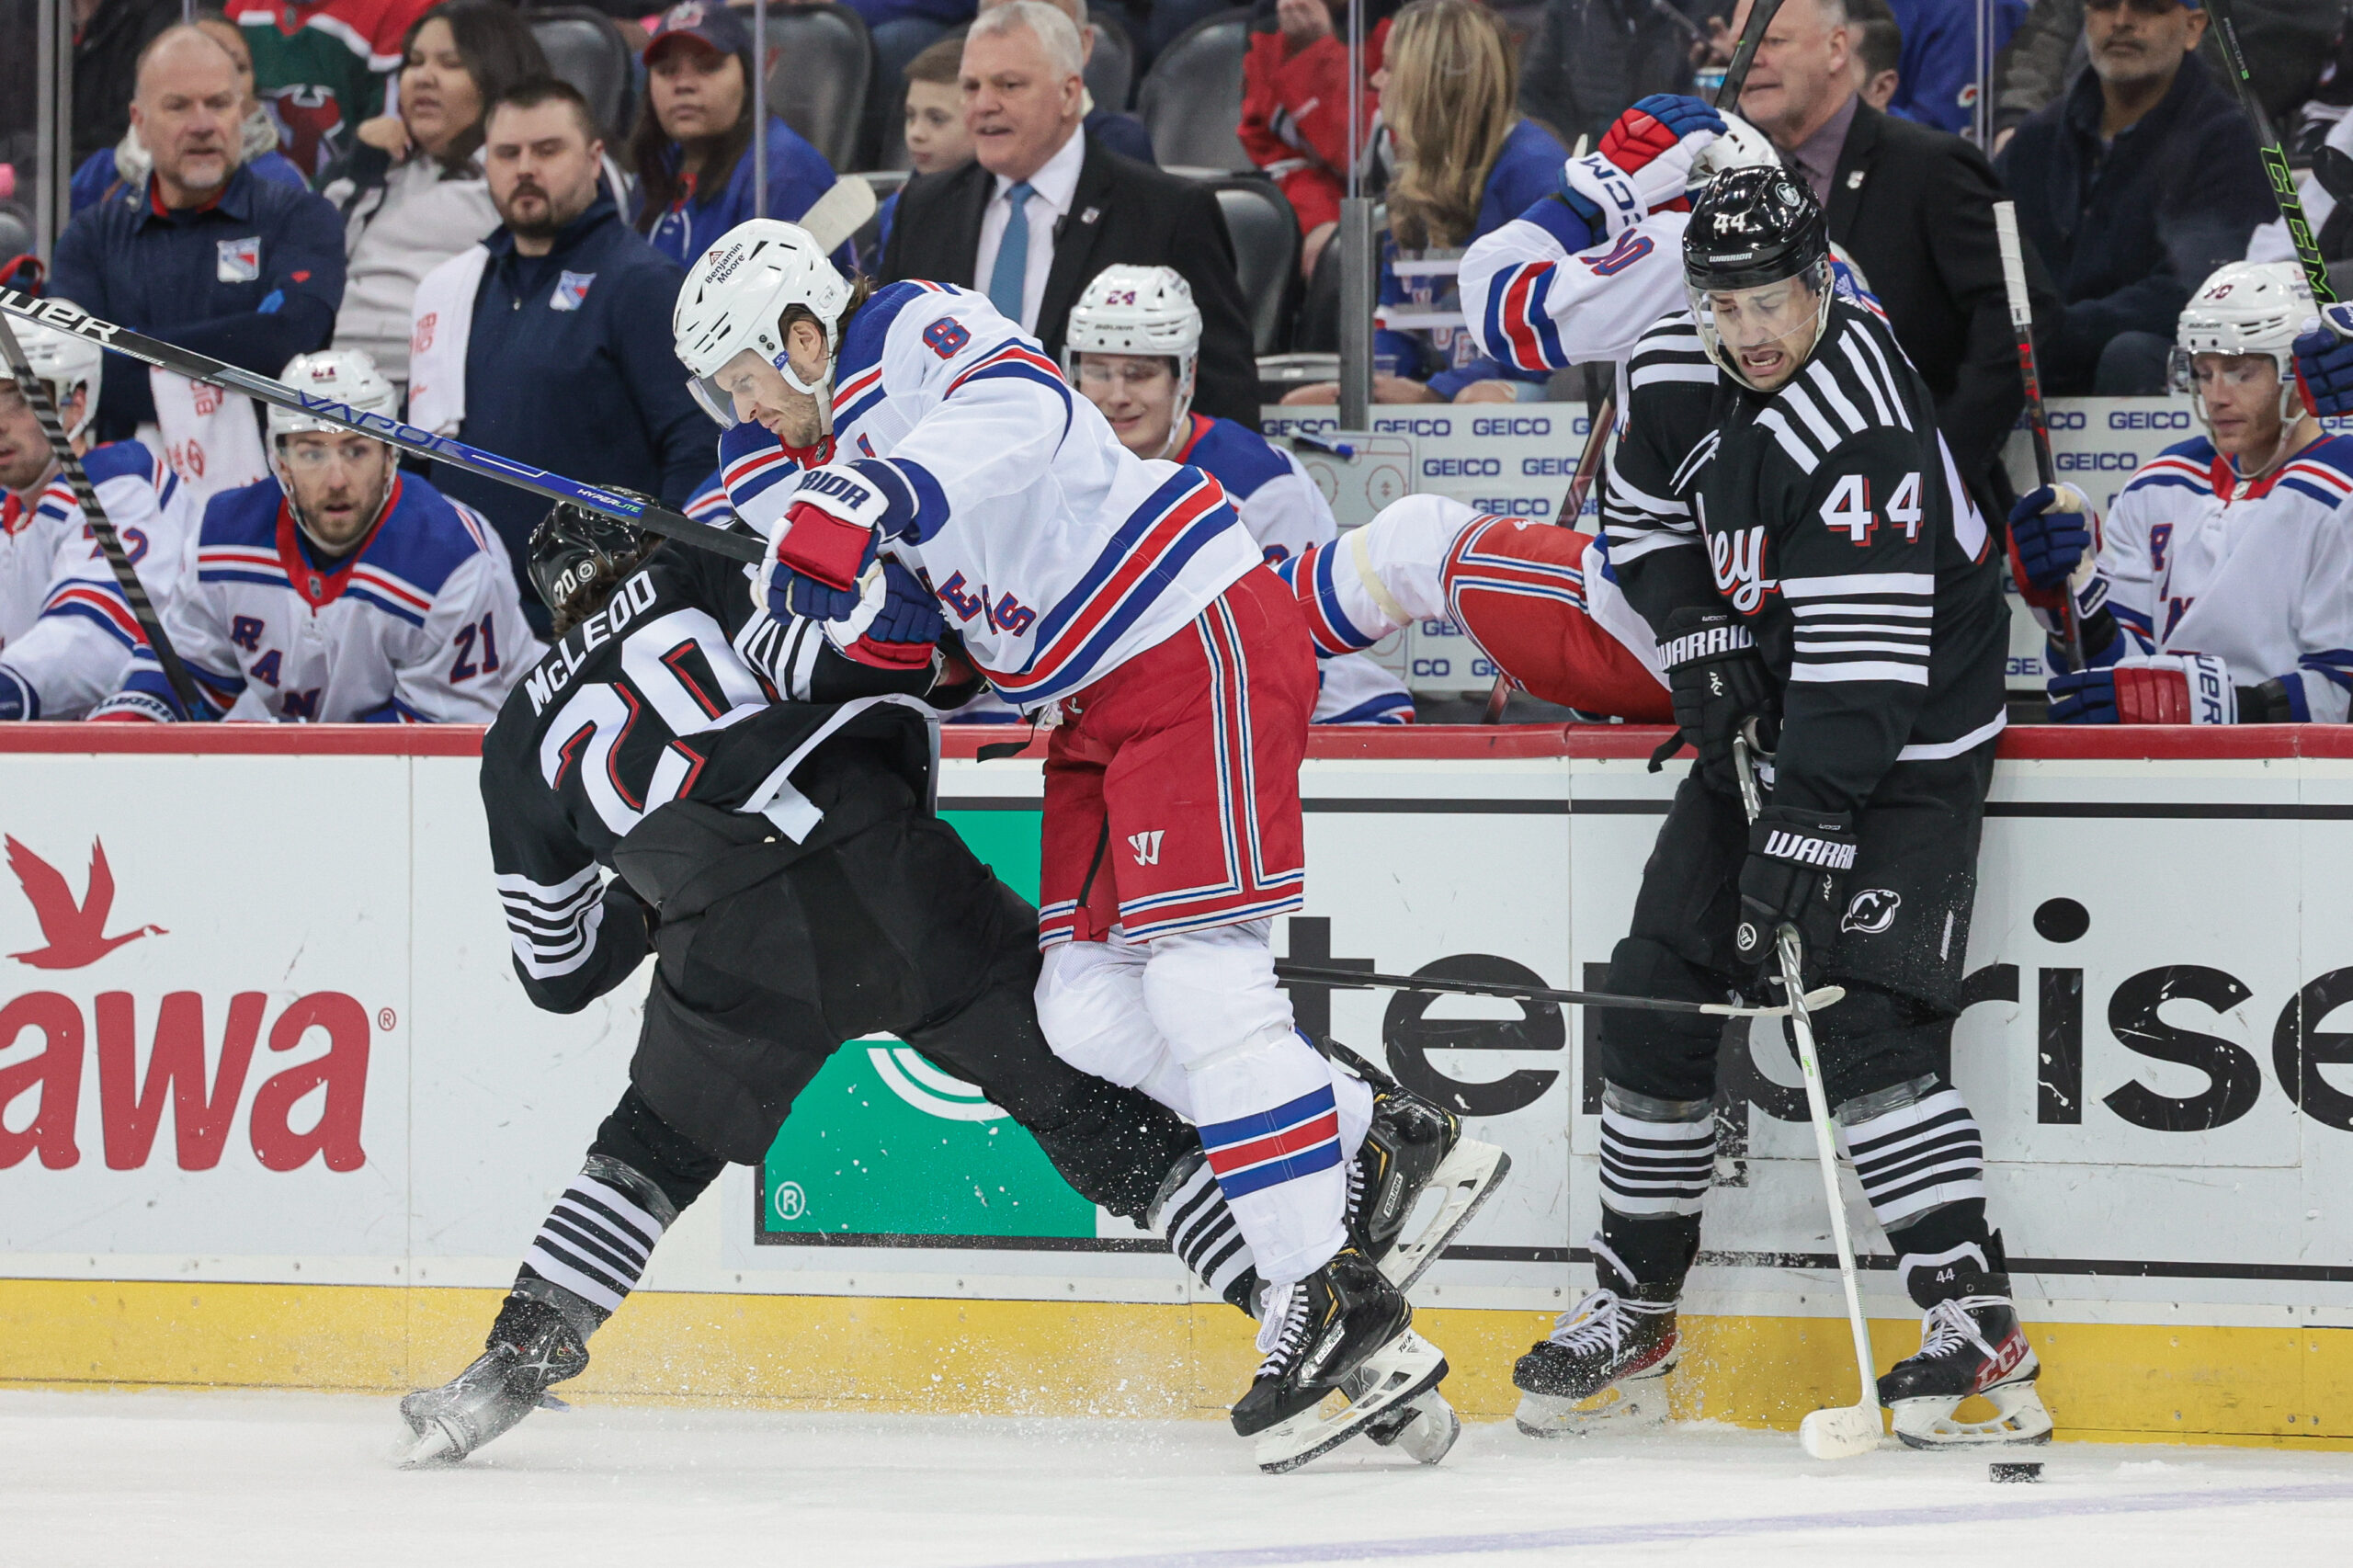 Preseason Gameday Preview: Devils at Rangers - The New Jersey